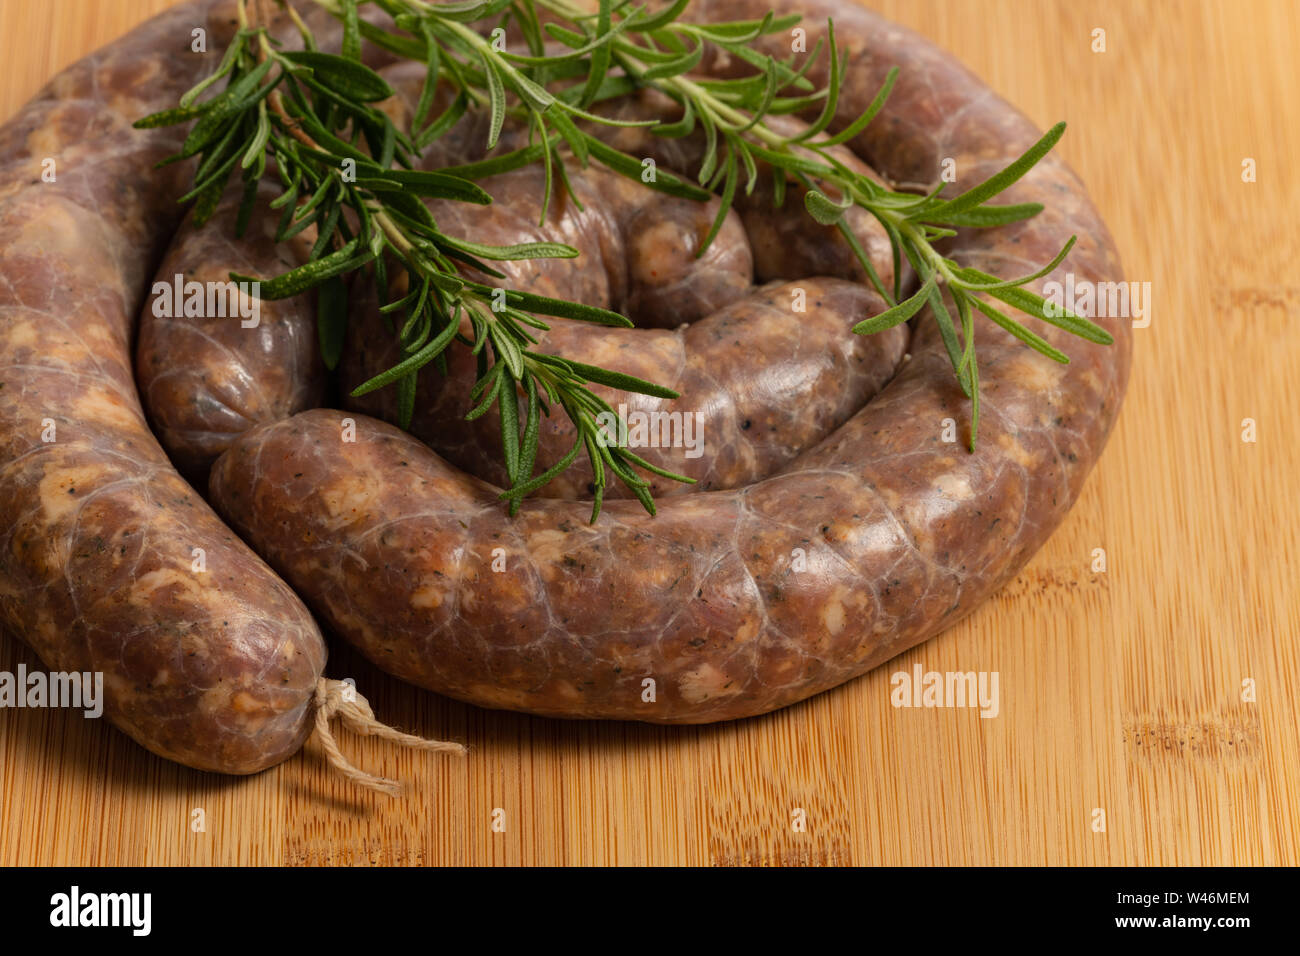 Raw homemade stuffed pork sausages and rosmarin isolated on a wood board. Stock Photo